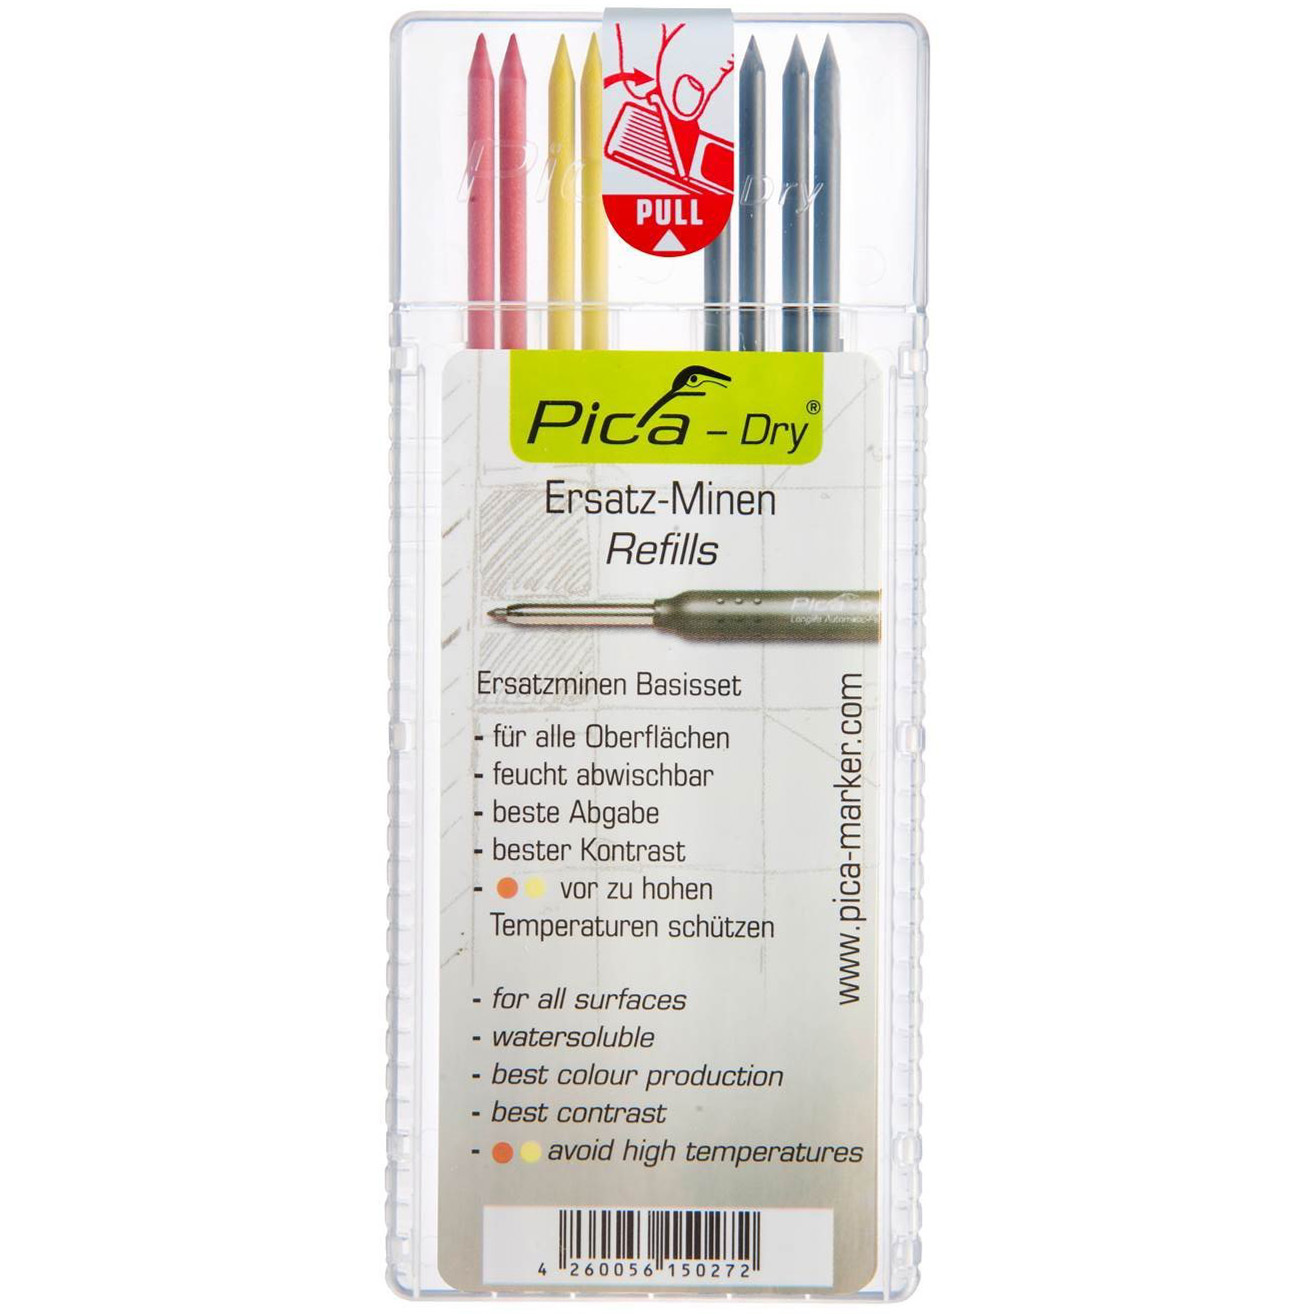 Pica Dry Longlife Automatic Pencil 3030 And 8 Pack Color Refills 4020